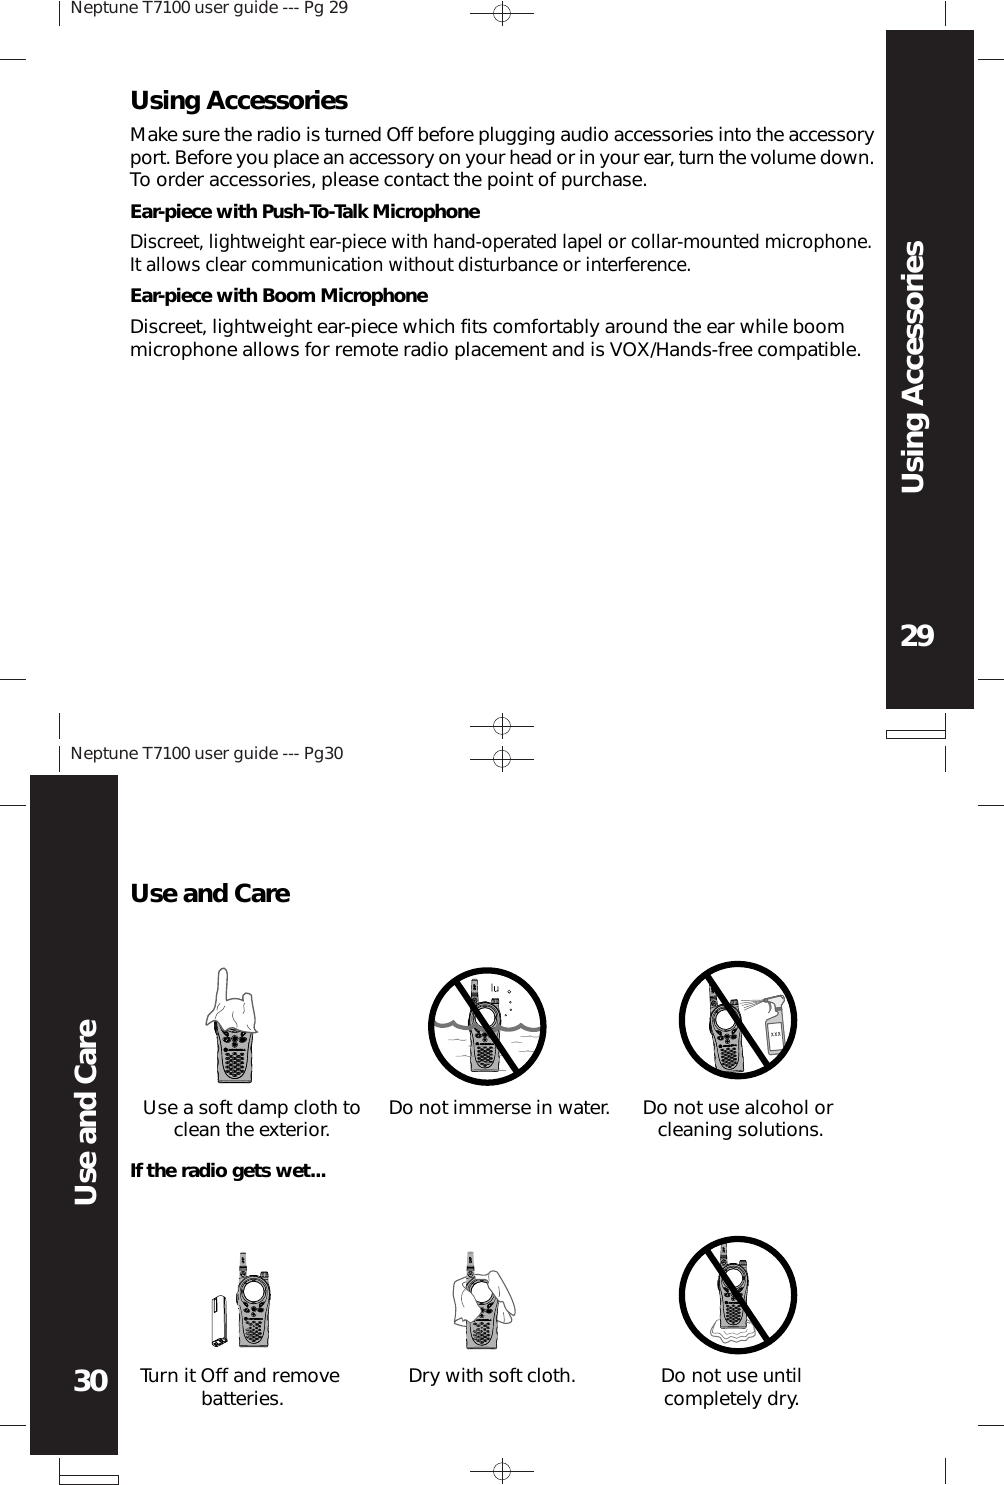 Neptune T7100 user guide --- Pg 2929Using AccessoriesNeptune T7100 user guide --- Pg3030Use and CareEar-piece with Push-To-Talk MicrophoneDiscreet, lightweight ear-piece with hand-operated lapel or collar-mounted microphone.It allows clear communication without disturbance or interference.Ear-piece with Boom MicrophoneDiscreet, lightweight ear-piece which fits comfortably around the ear while boommicrophone allows for remote radio placement and is VOX/Hands-free compatible.Using AccessoriesMake sure the radio is turned Off before plugging audio accessories into the accessoryport. Before you place an accessory on your head or in your ear, turn the volume down.To order accessories, please contact the point of purchase.XXXUse and CareUse a soft damp cloth toclean the exterior. Do not immerse in water. Do not use alcohol orcleaning solutions.Turn it Off and removebatteries. Dry with soft cloth. Do not use untilcompletely dry.If the radio gets wet...